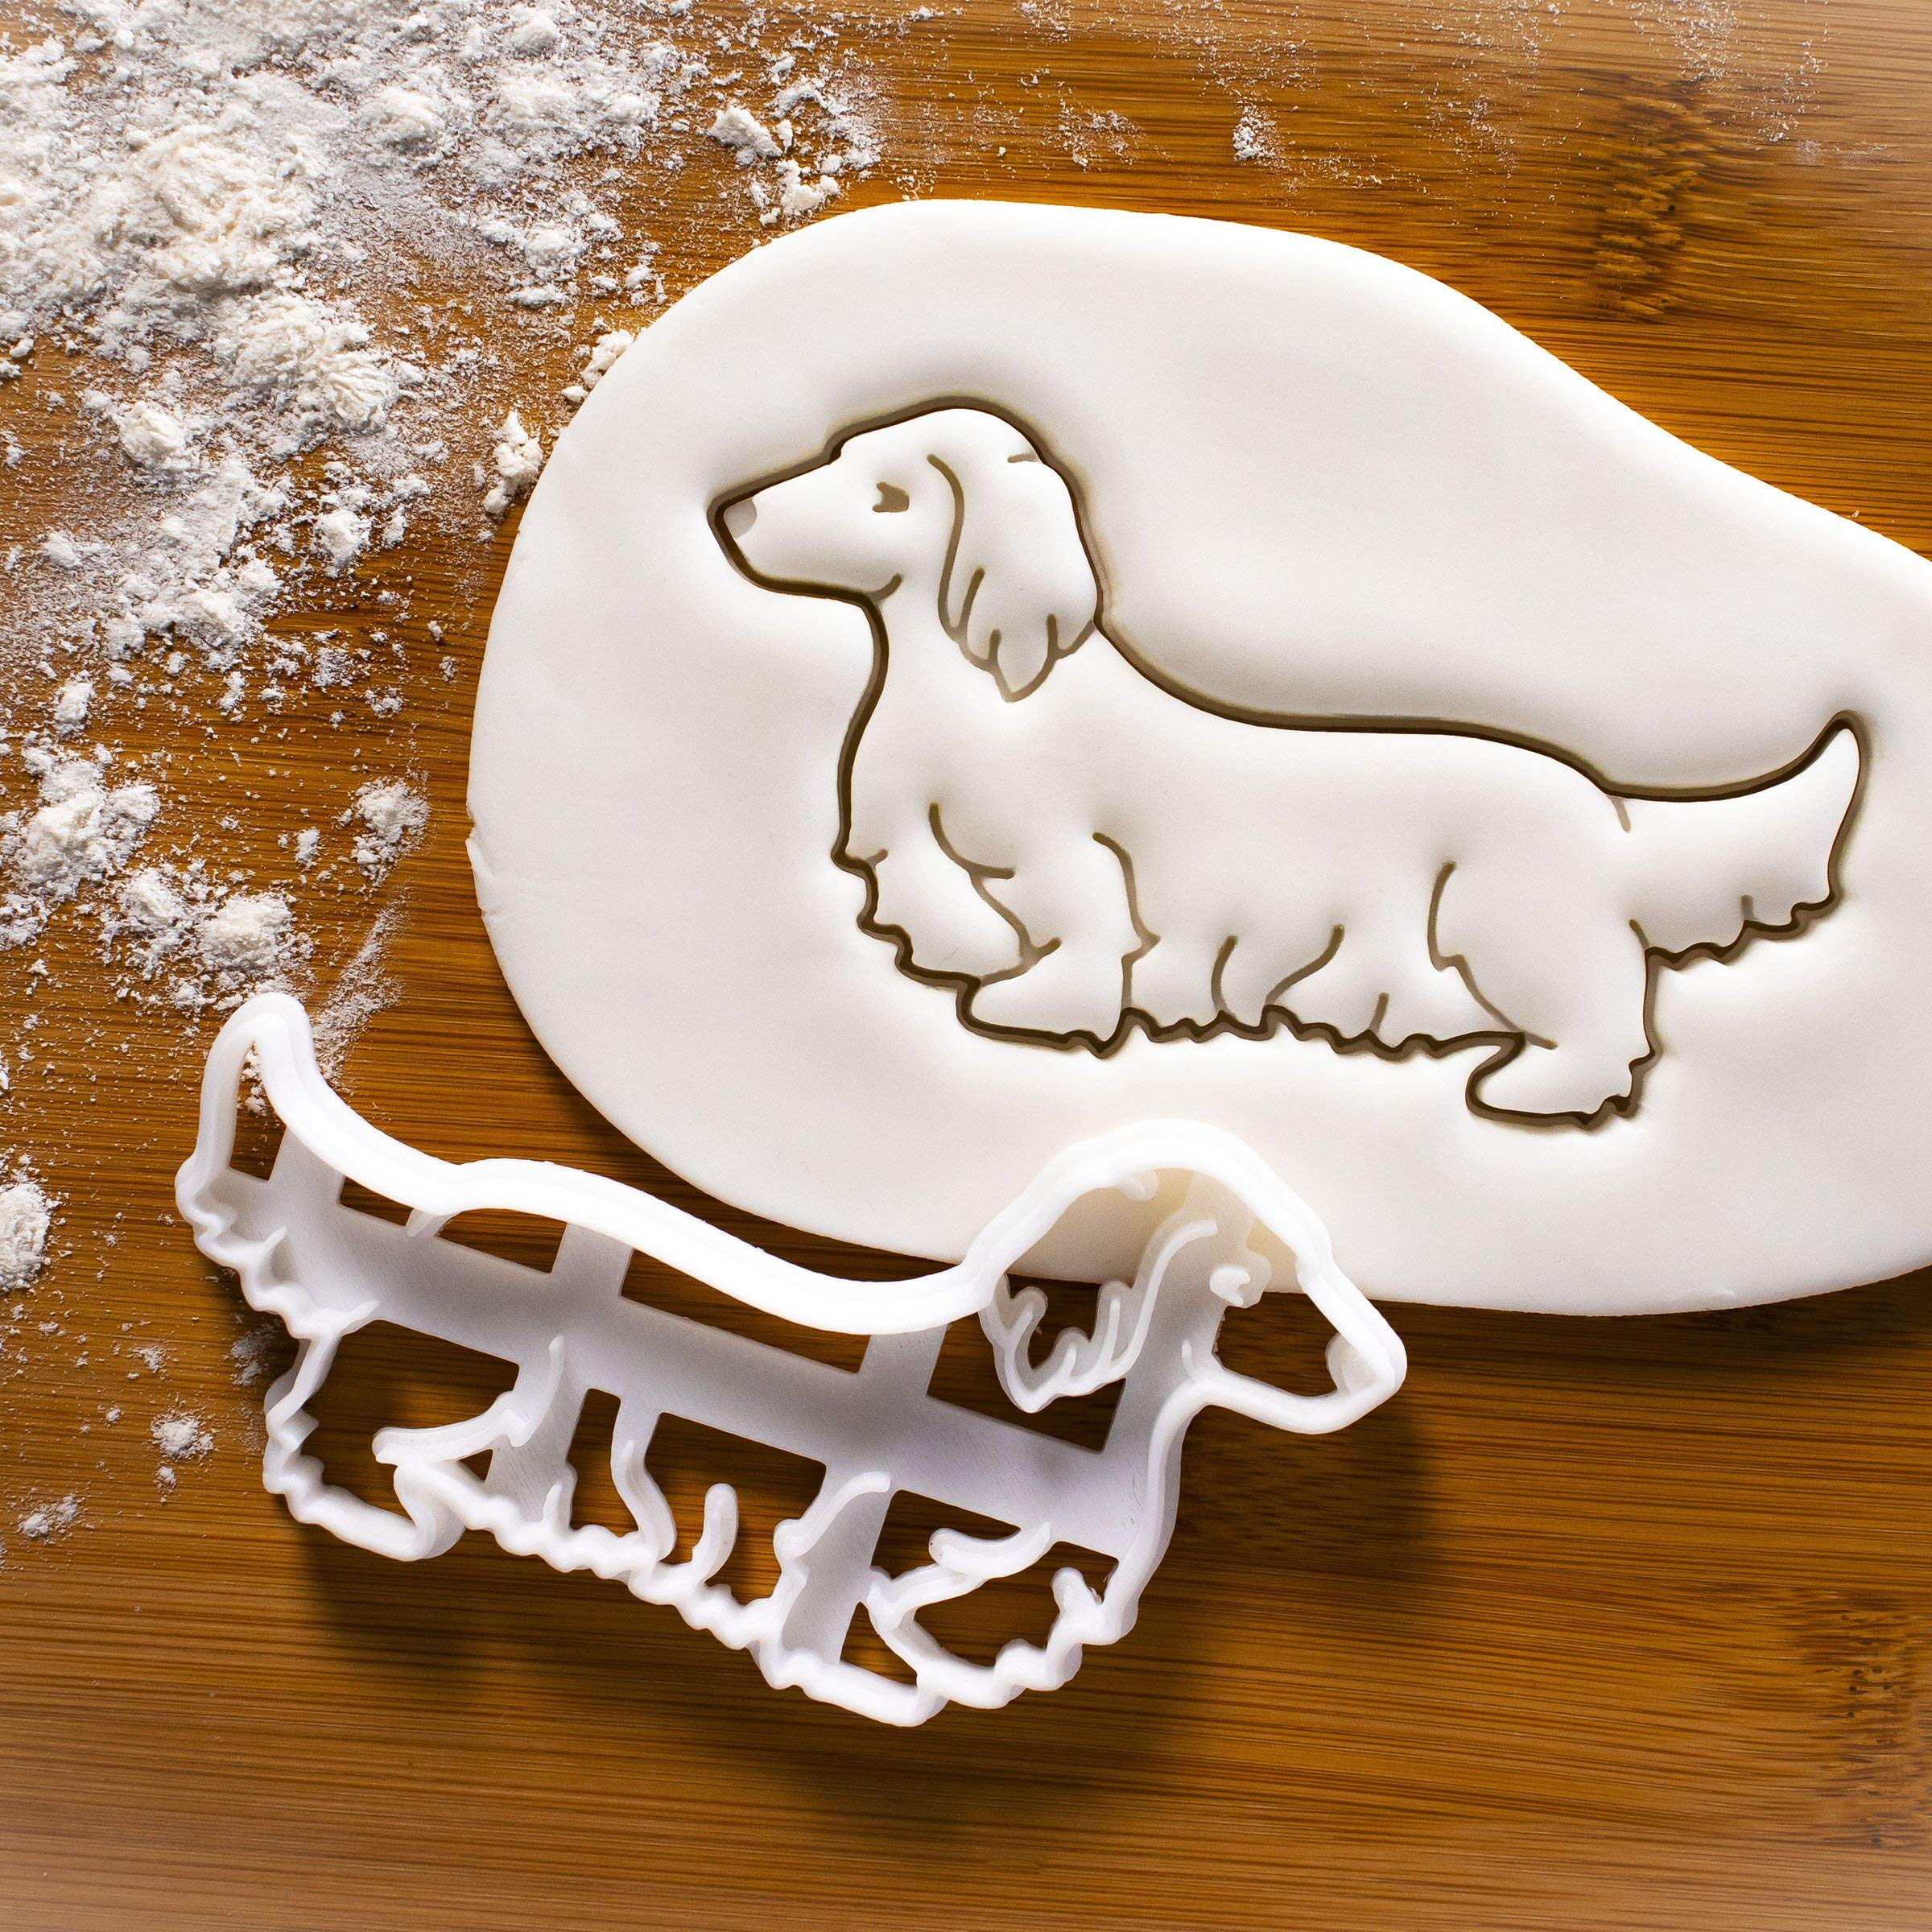 Long Haired Dachshund Body cookie cutter, 1 piece - Bakerlogy